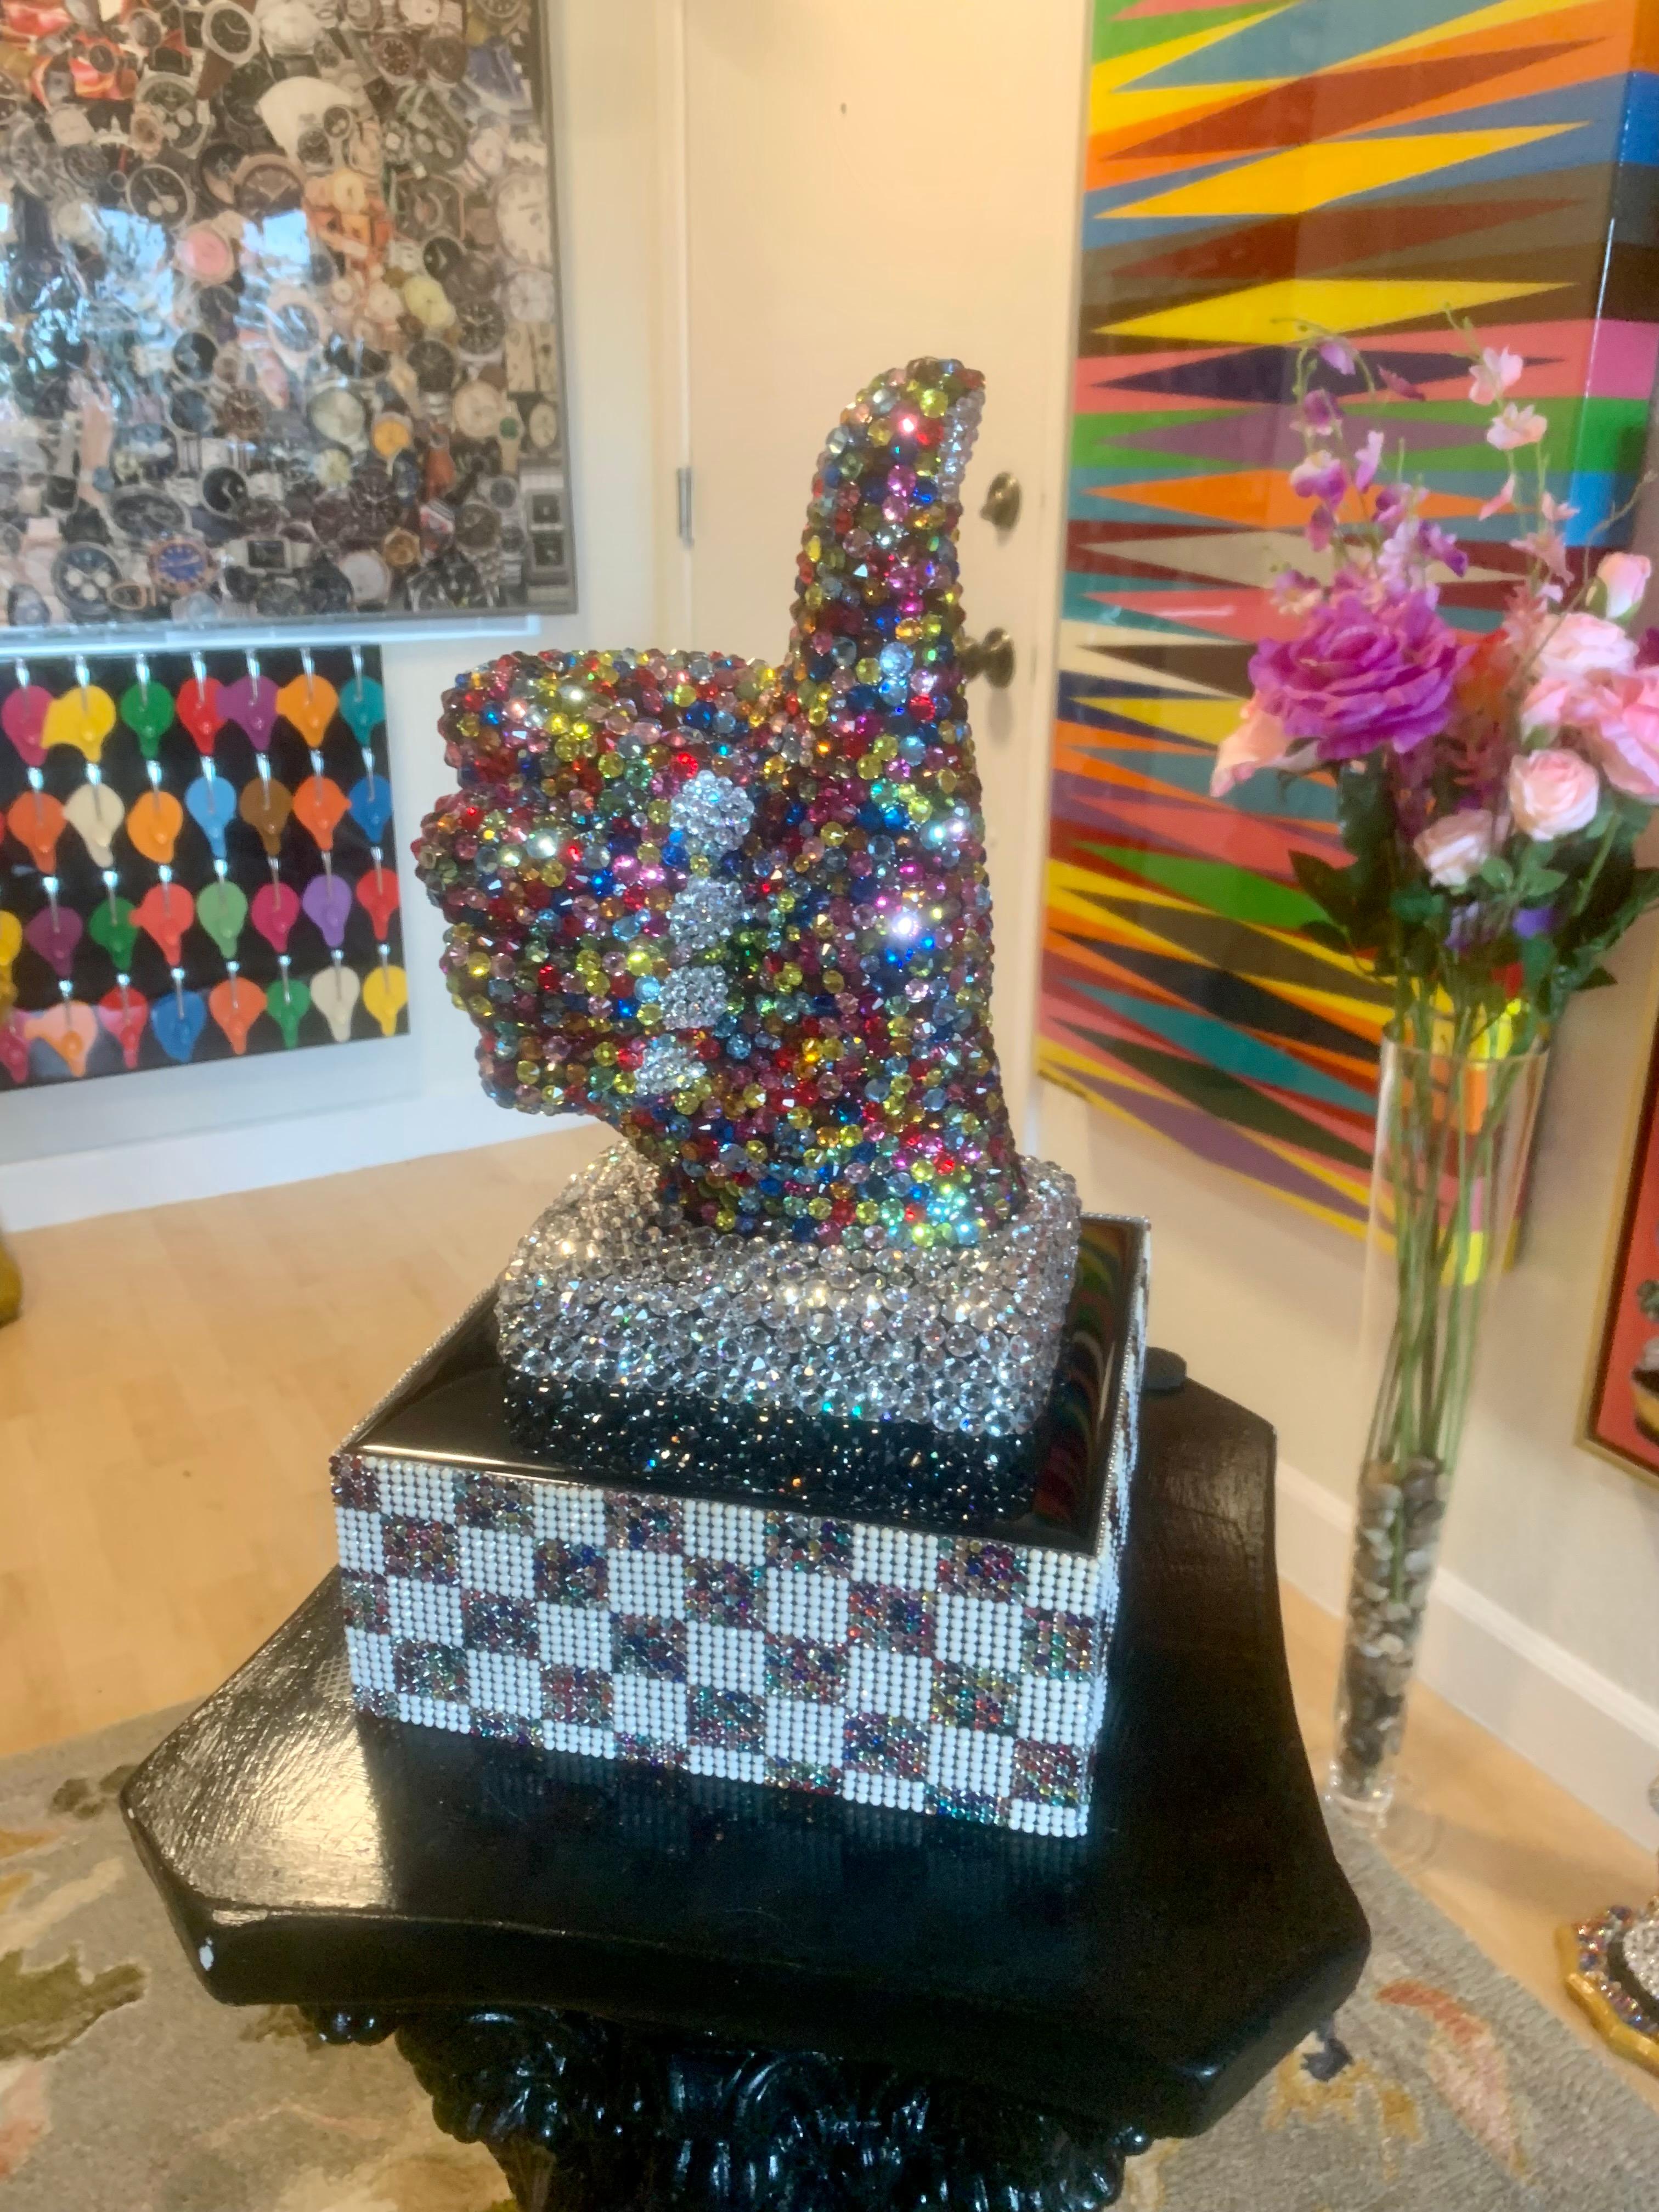 Mauro Oliveira Figurative Sculpture - THUMBS UP FOR LIFE (One of a Kind Swarovski Mixed Media Sculpture)